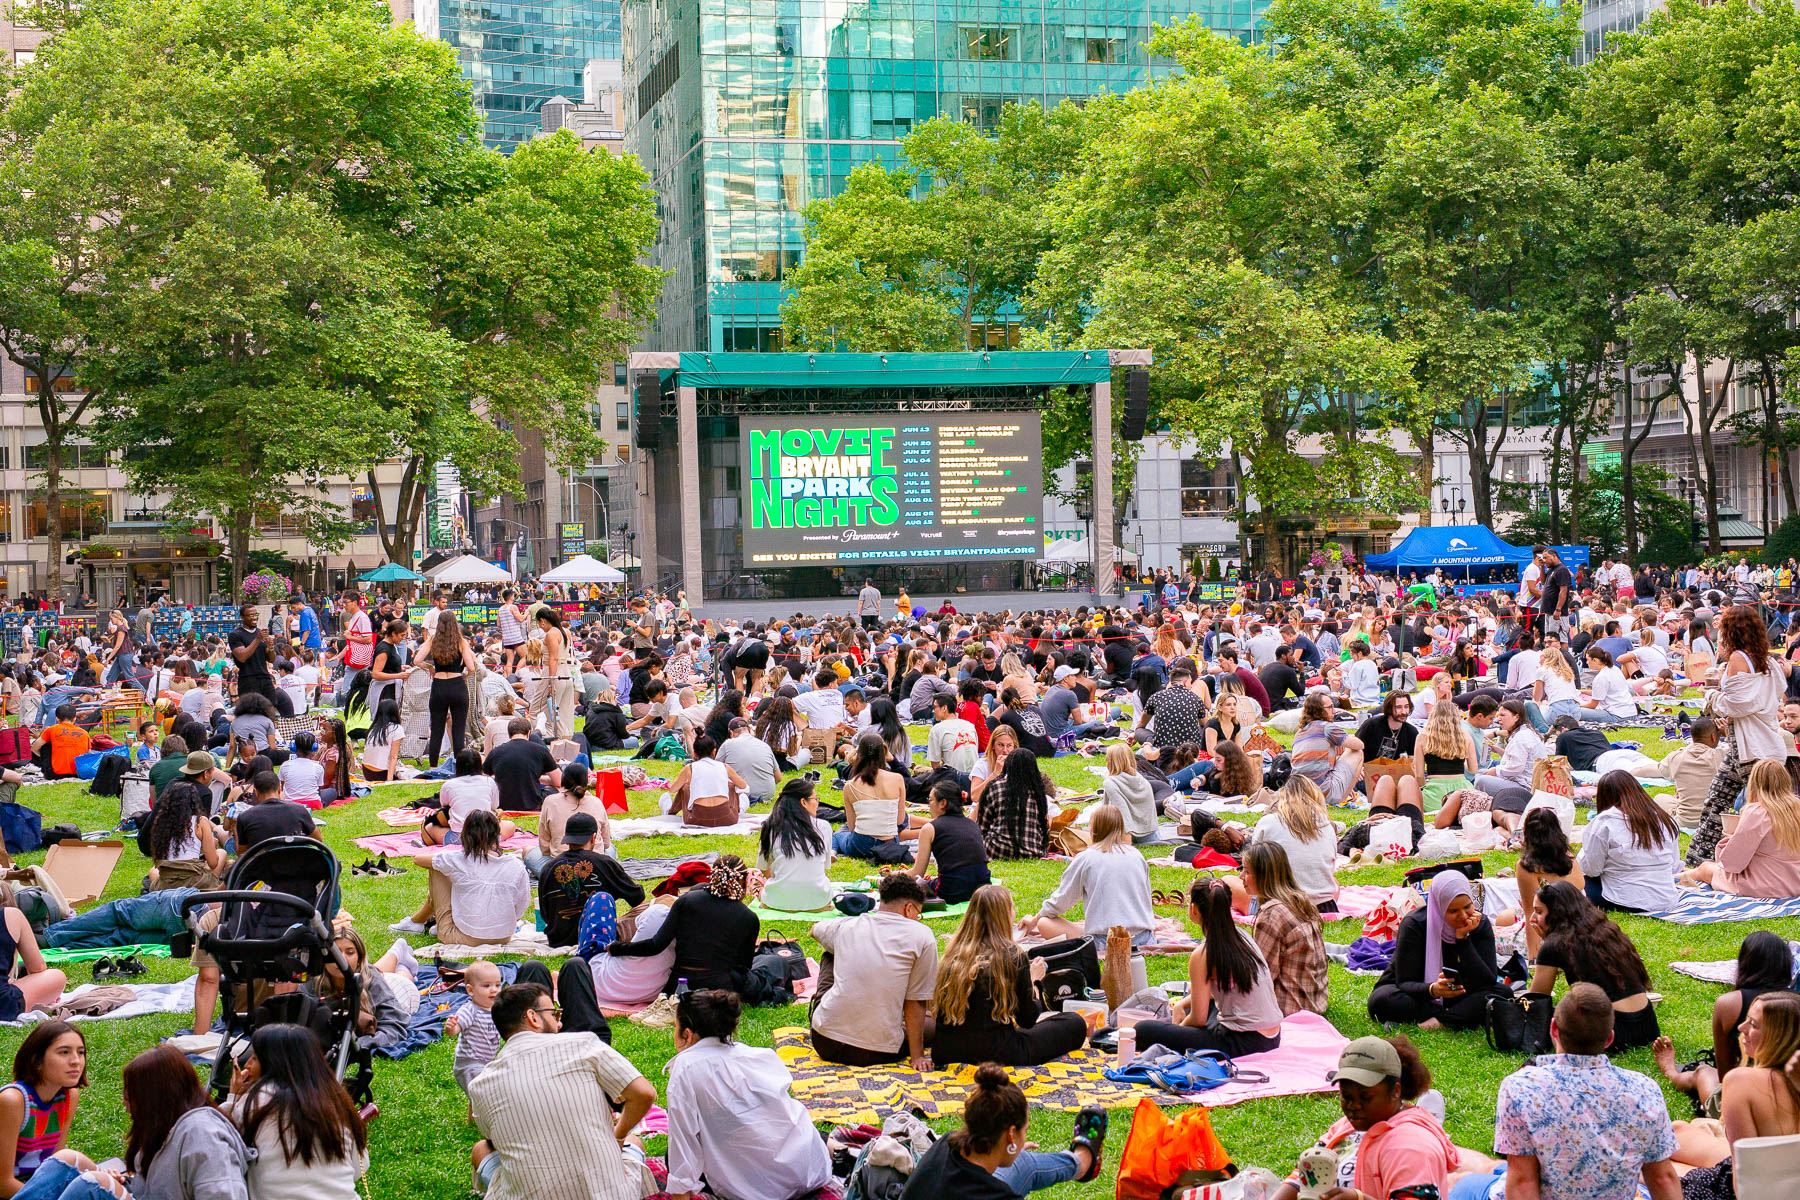 Movies in the Park at Bryant Park, Where to Watch Outdoor Movies in New York City